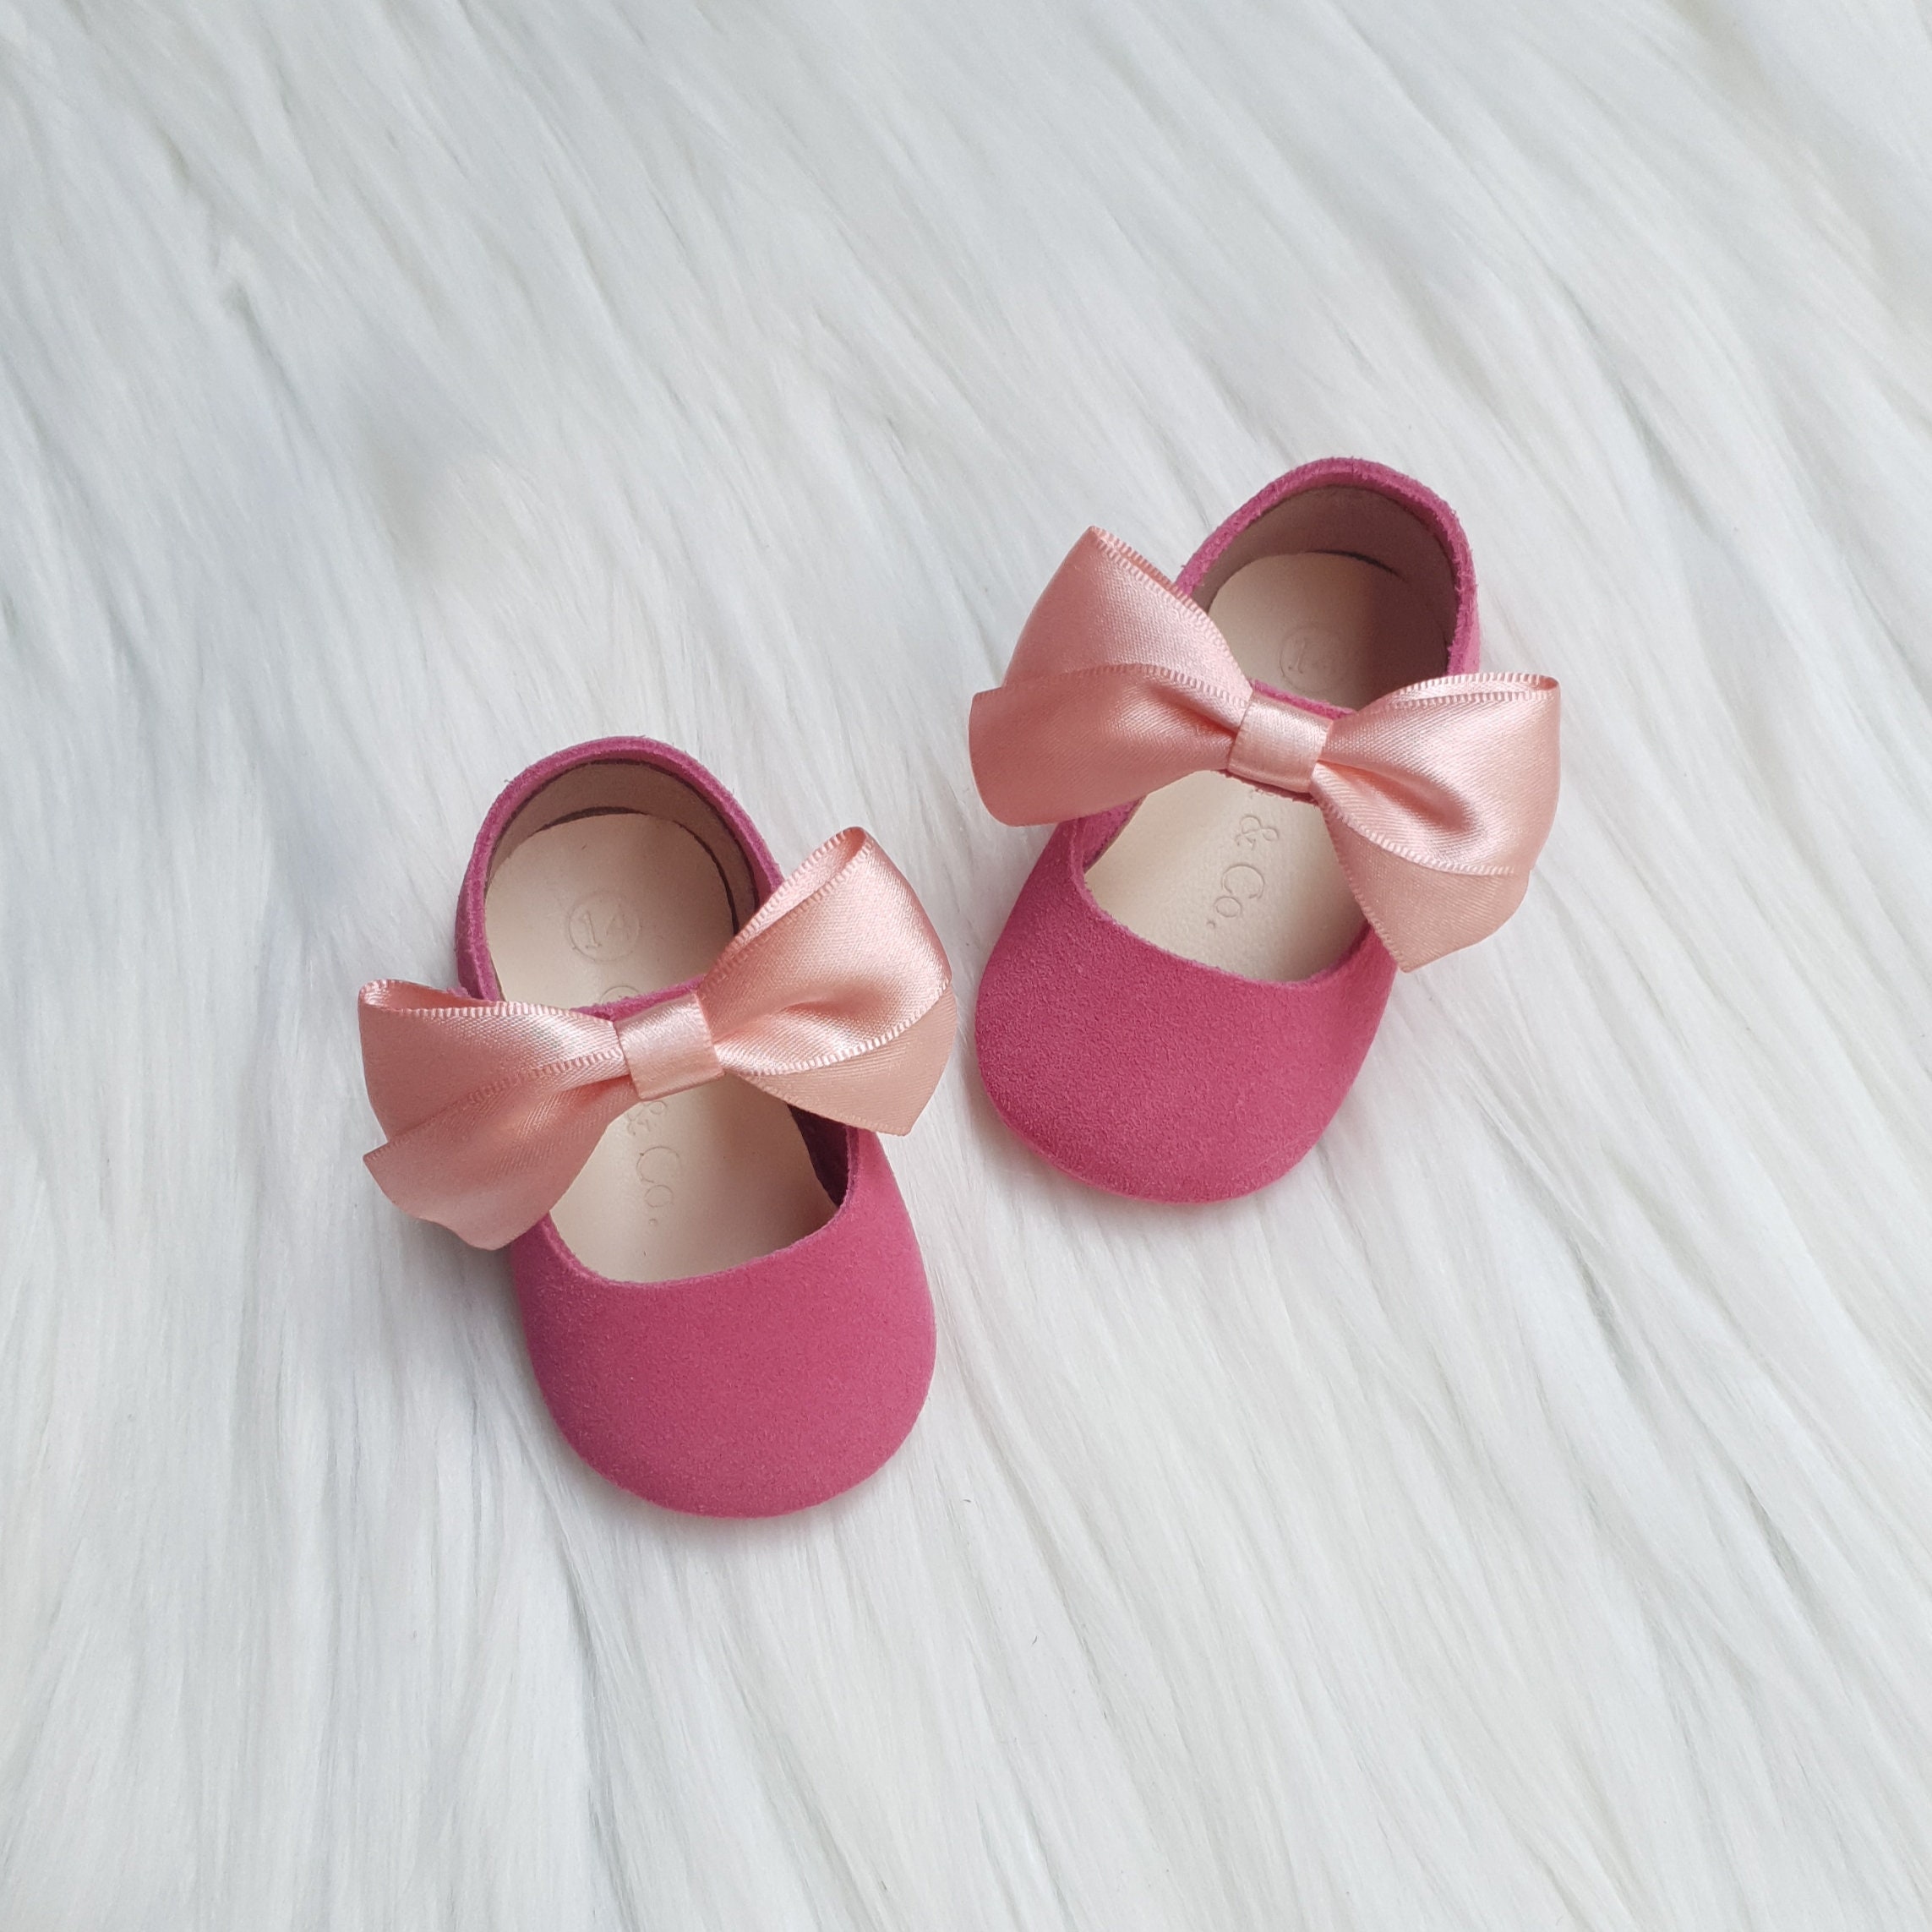 hot pink baby shoes